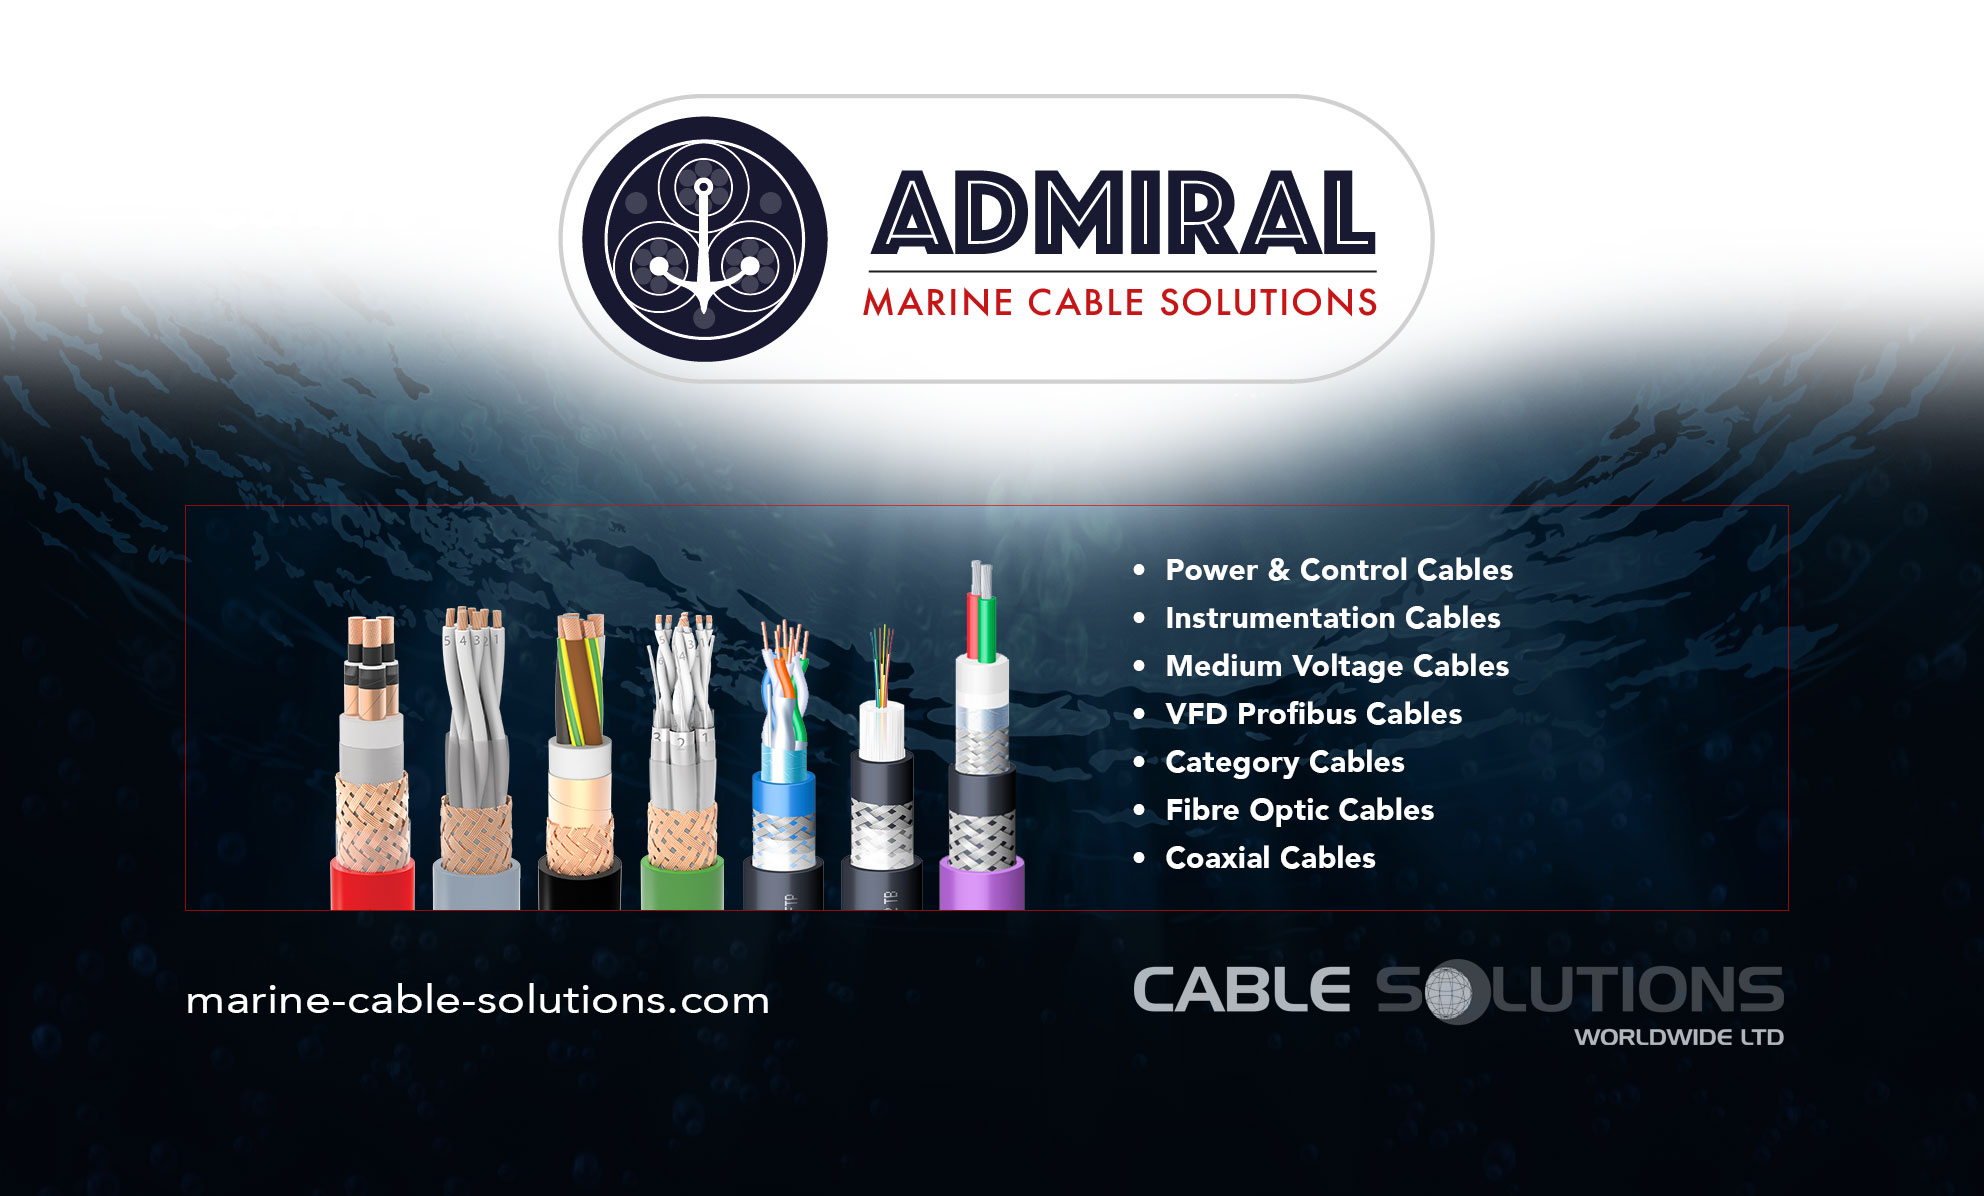 ADMIRAL marine cables